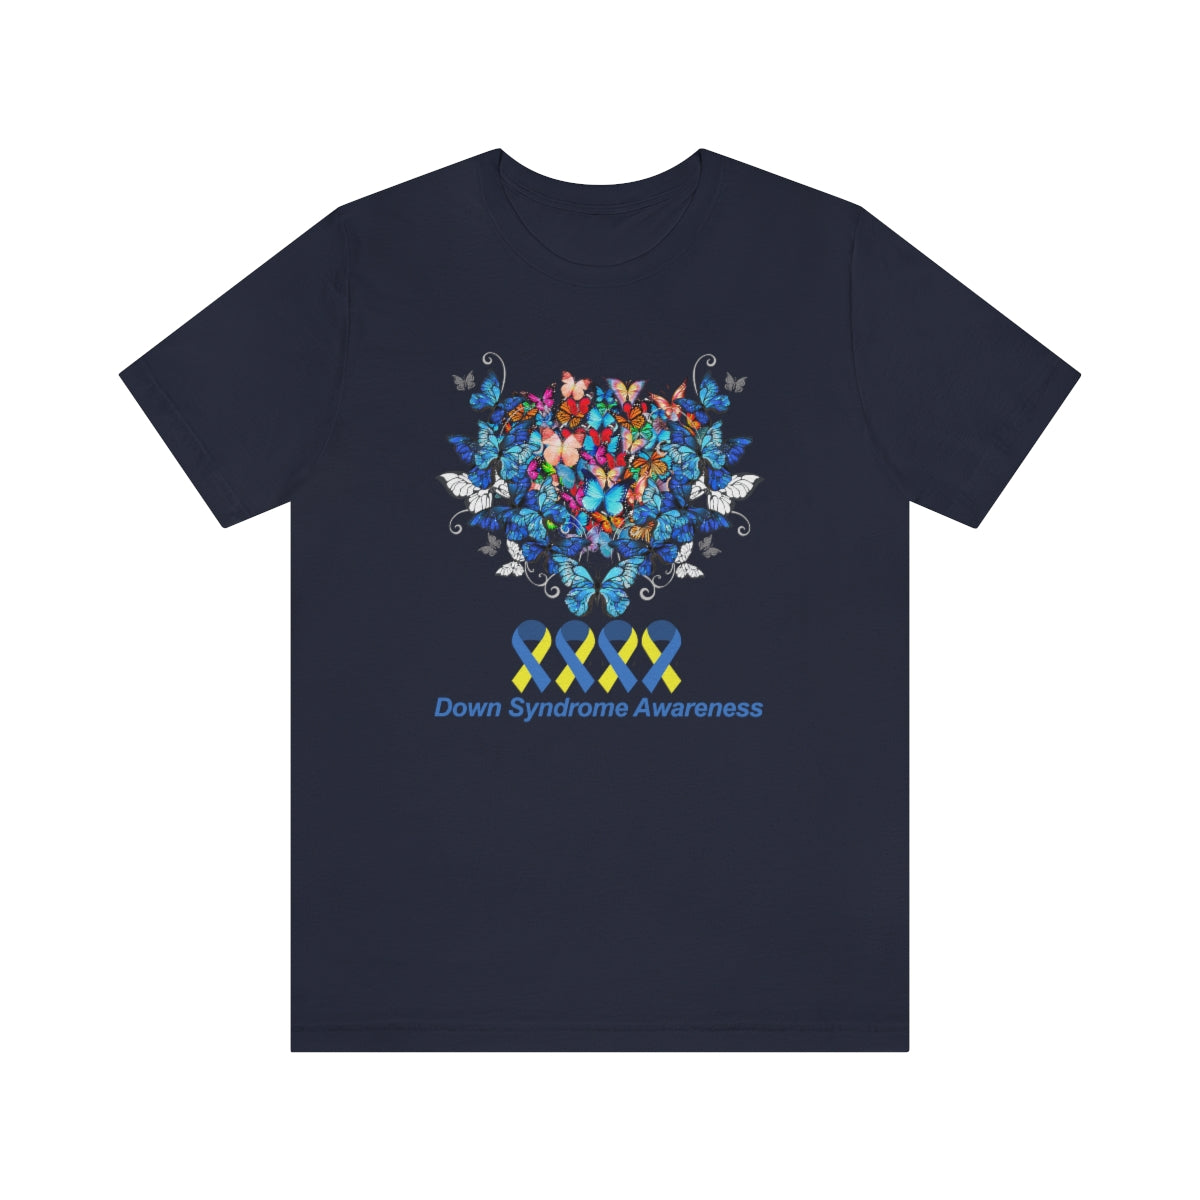 Down Syndrome Awareness T-Shirt